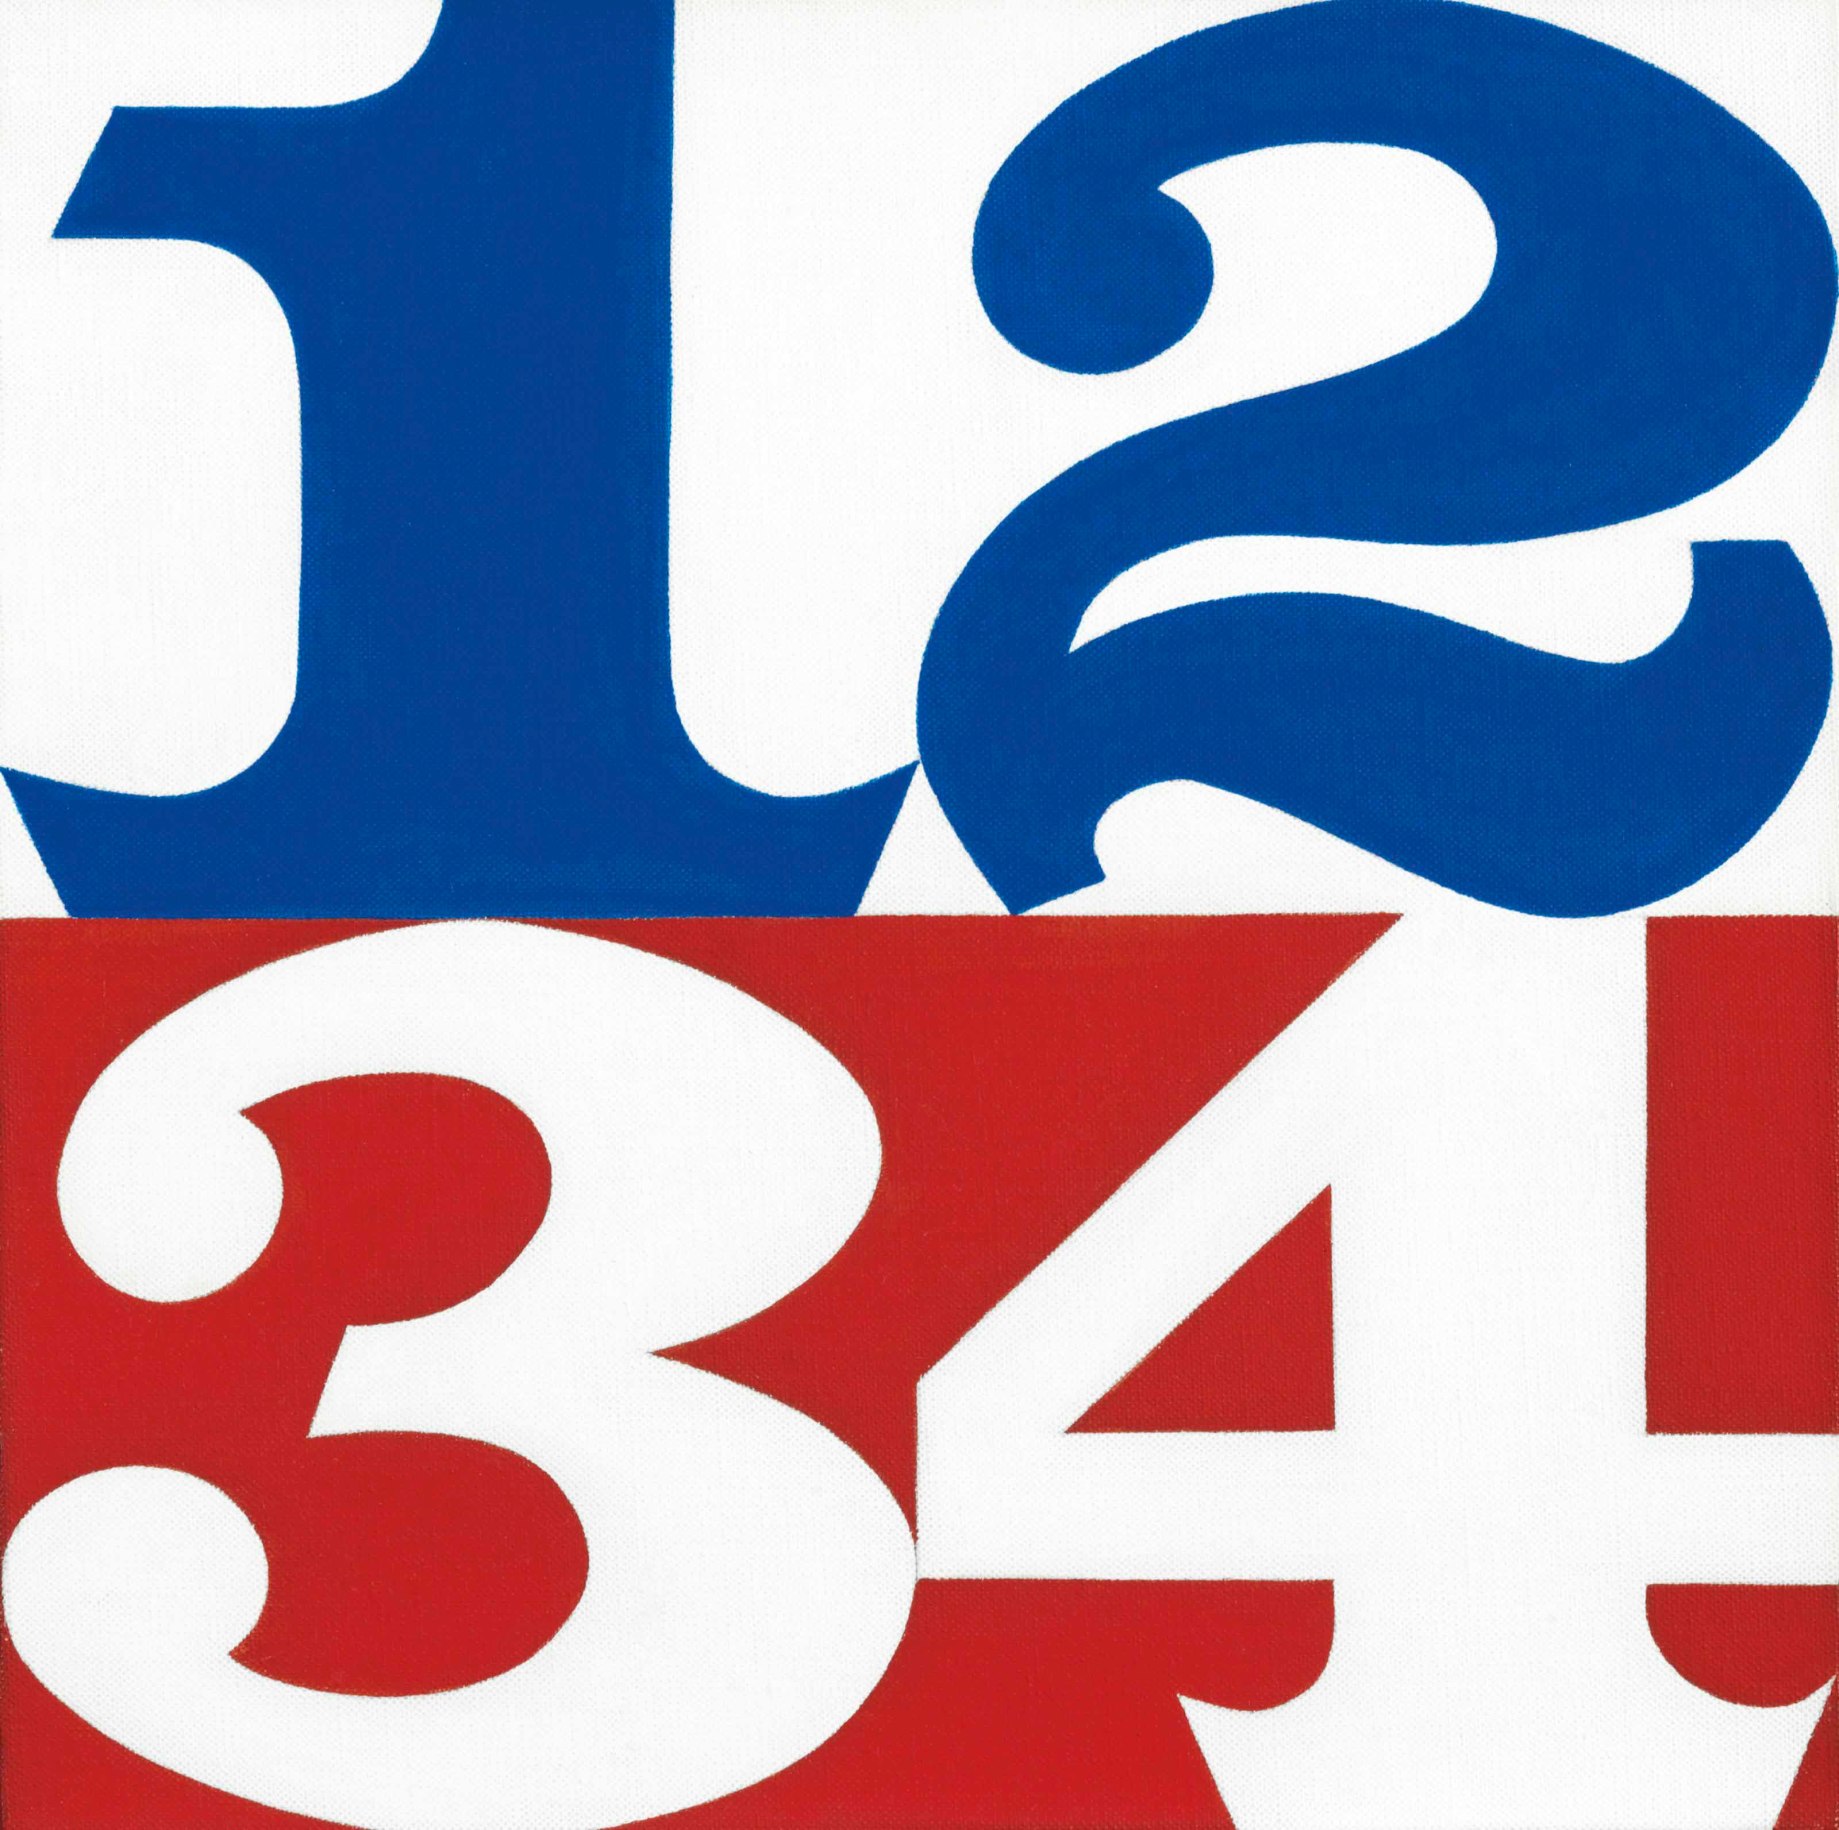 1, 2, 3, 4, a 12-inch square painting, the top half consisting of the numerals one and two in blue against a white background, and the bottom half of the numerals three and four in white against a red background.